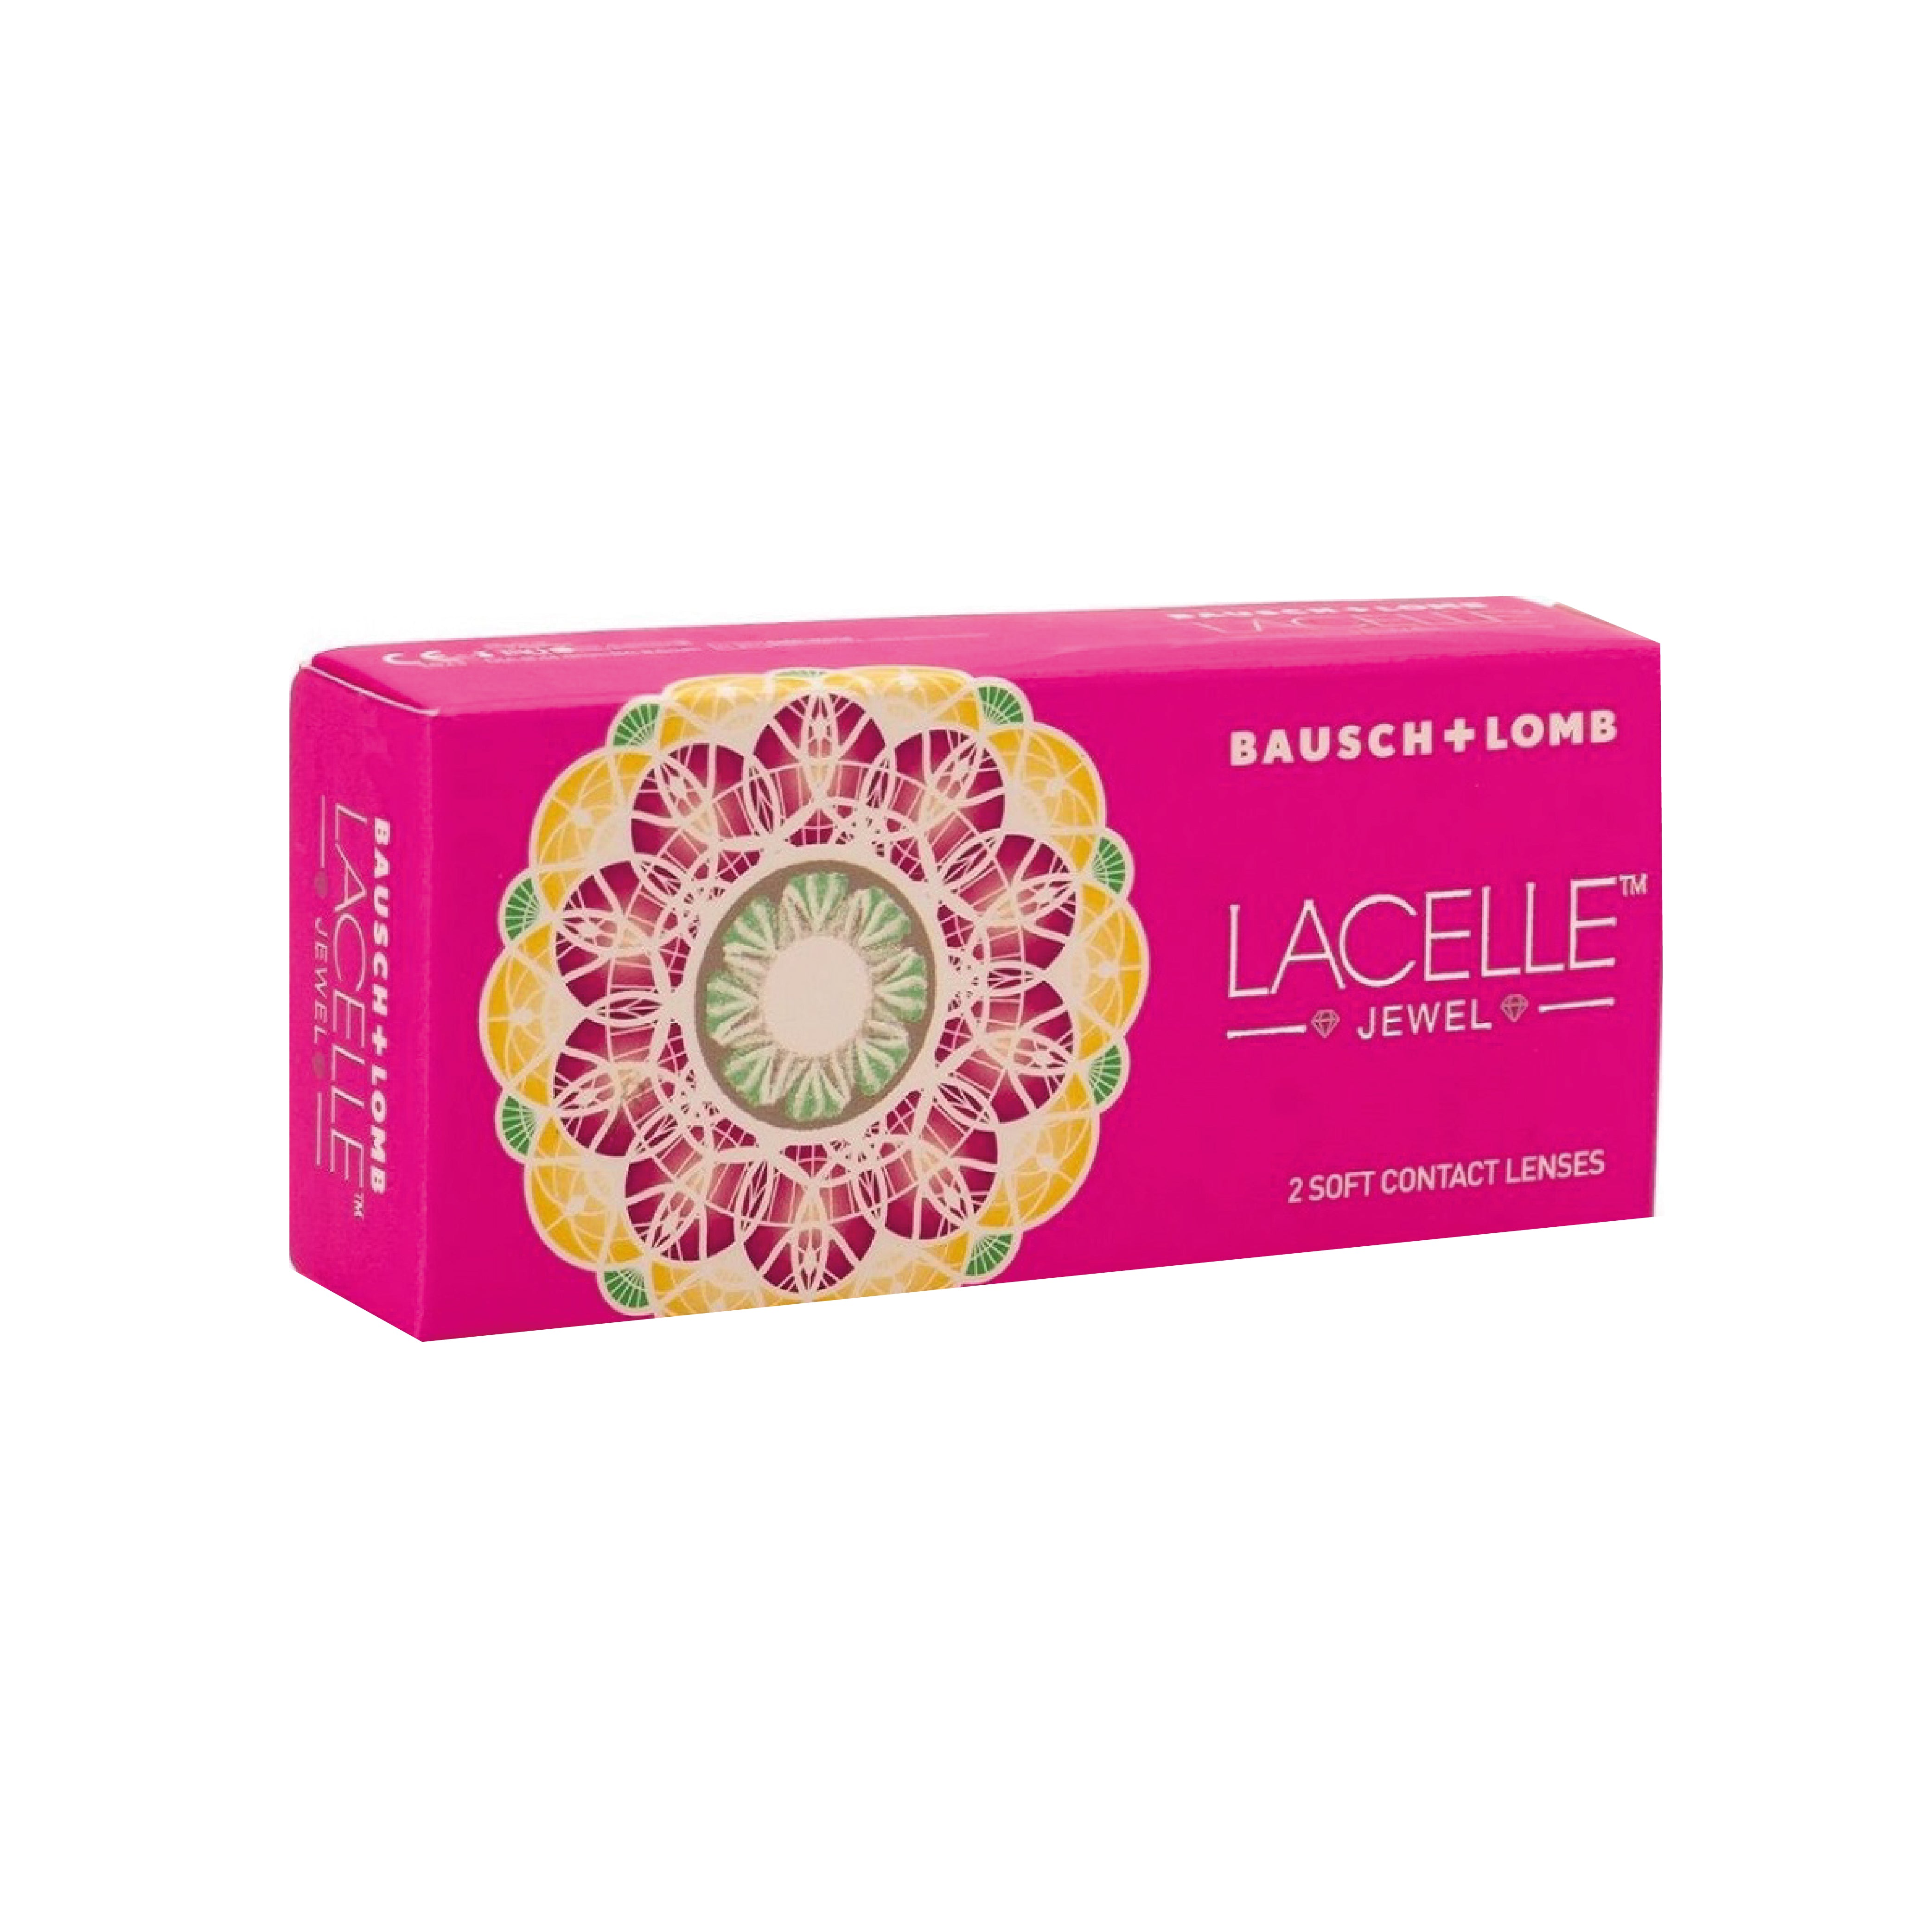 Bausch & Lomb Lacelle Jewel - Amethyst Violet (2 Pack)